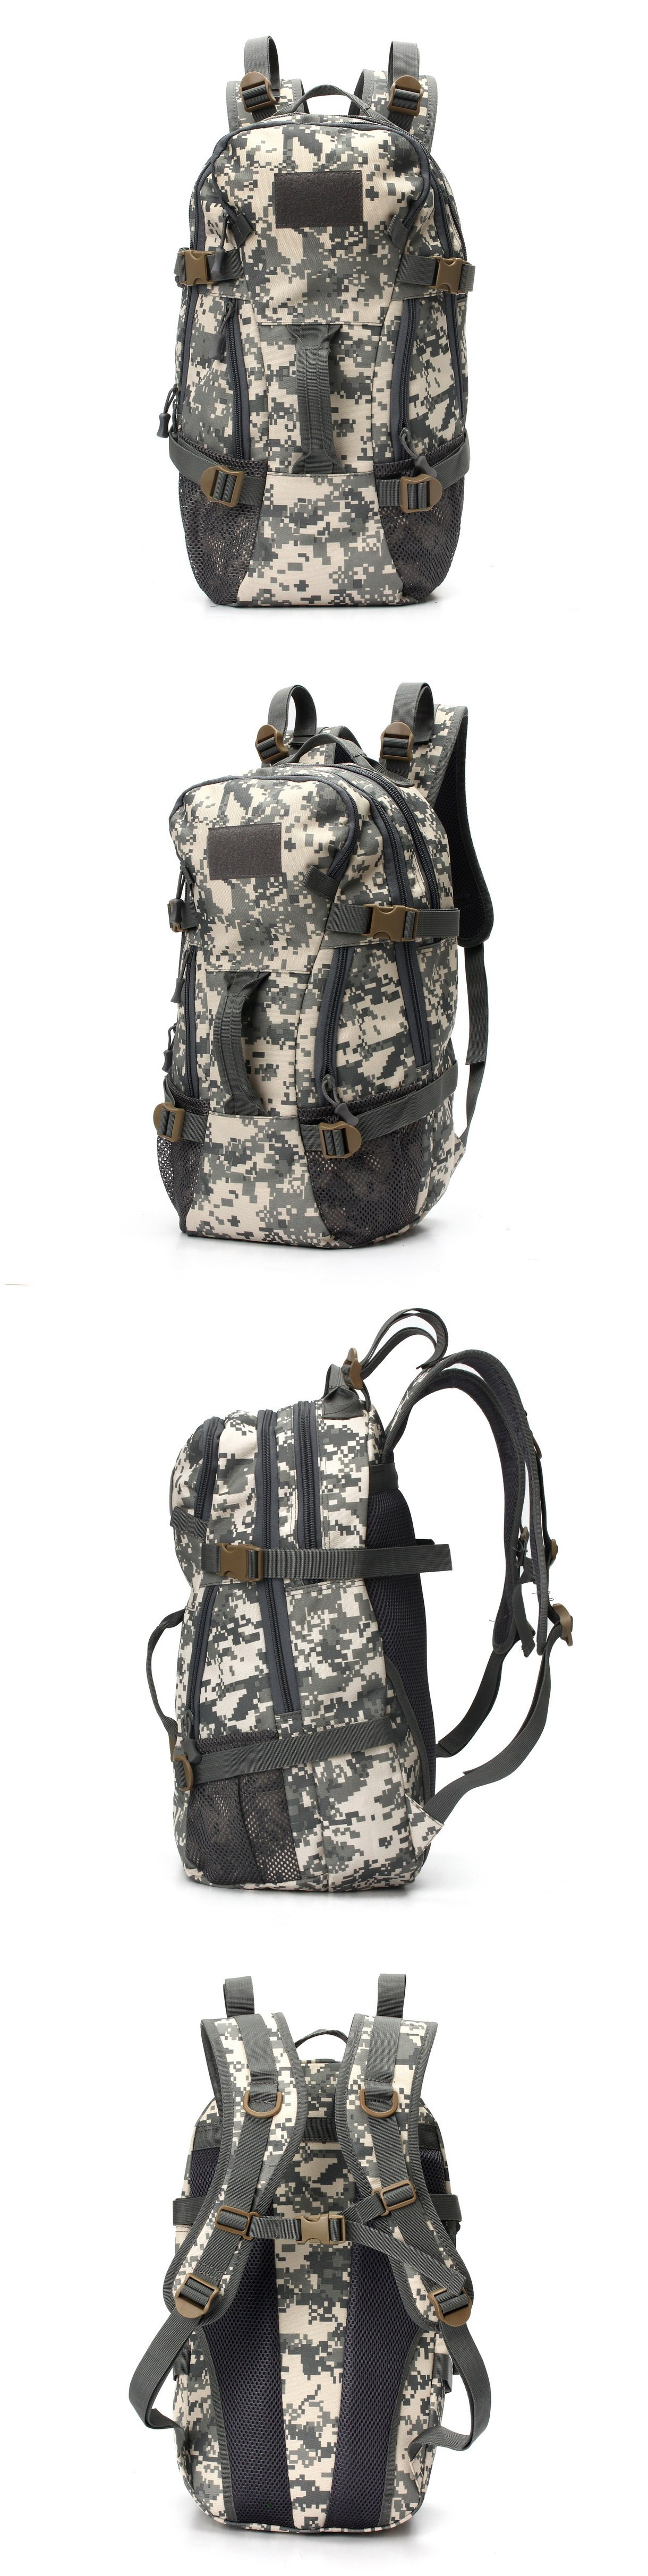 Outdoor-Camping-Tactical-Backpack-Mountaineering-Camouflage-ACU-Bag-Rucksack-1130438-2